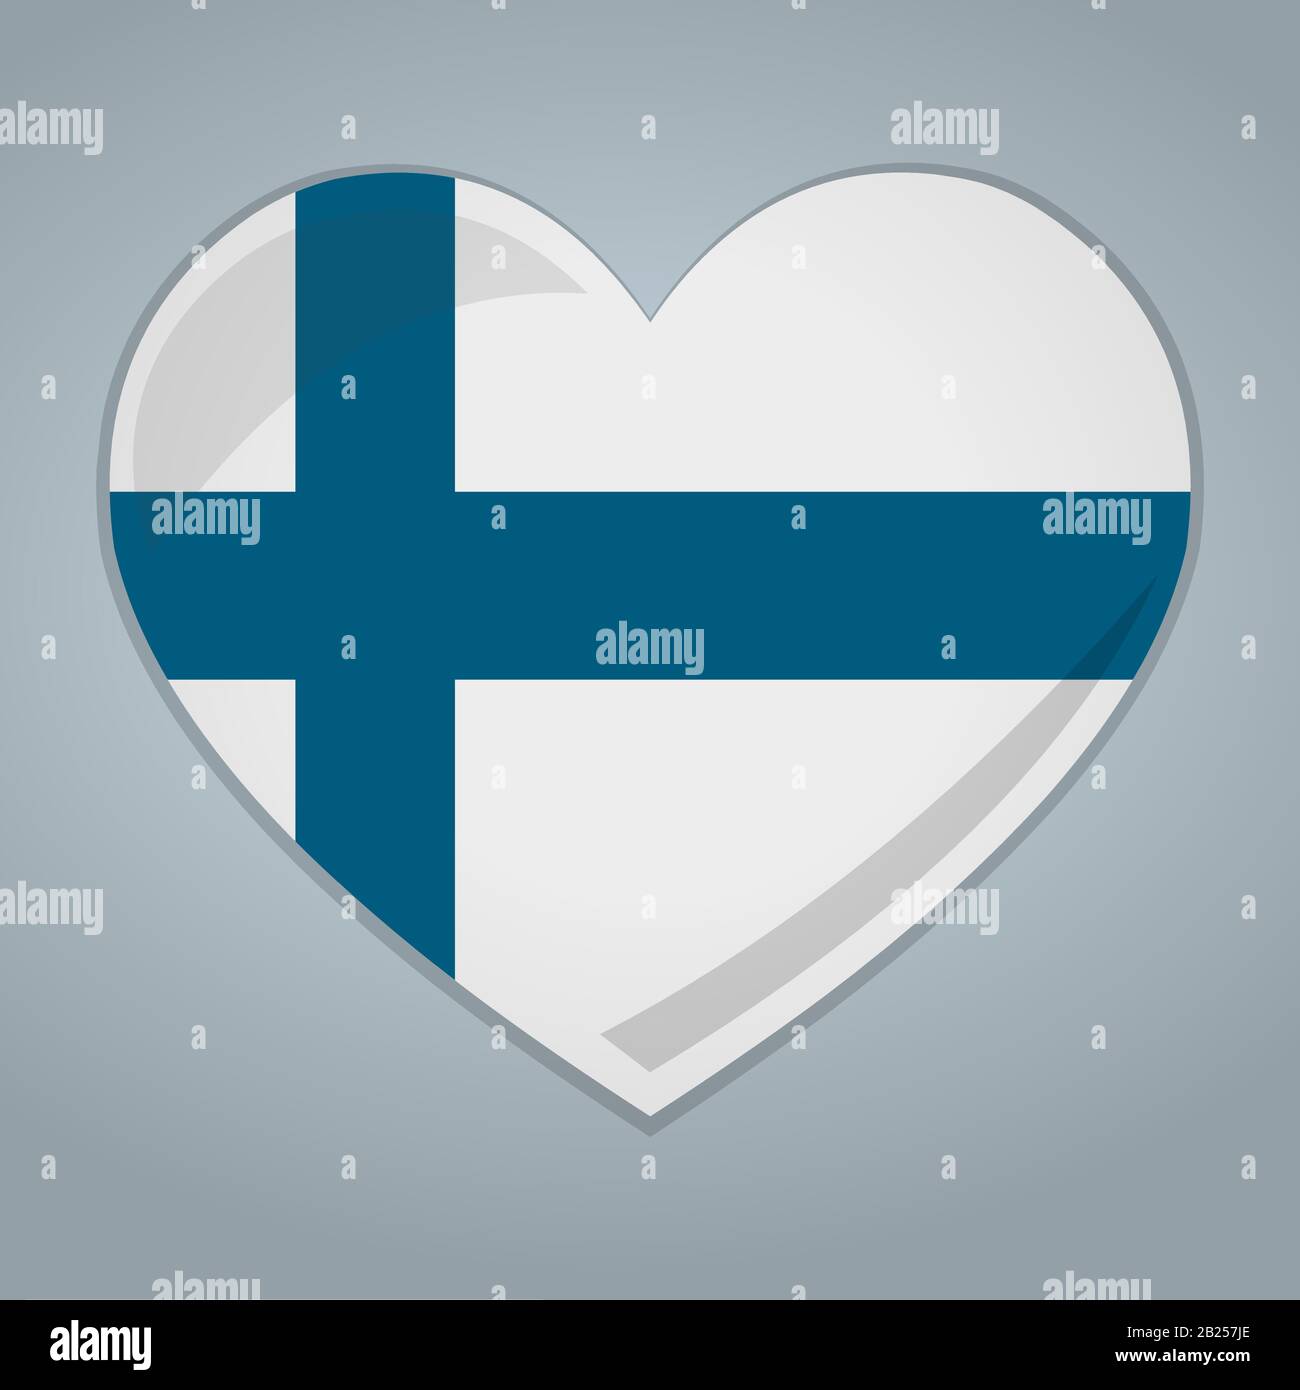 heart with finland flag isolated vector symbol illustration Stock Vector